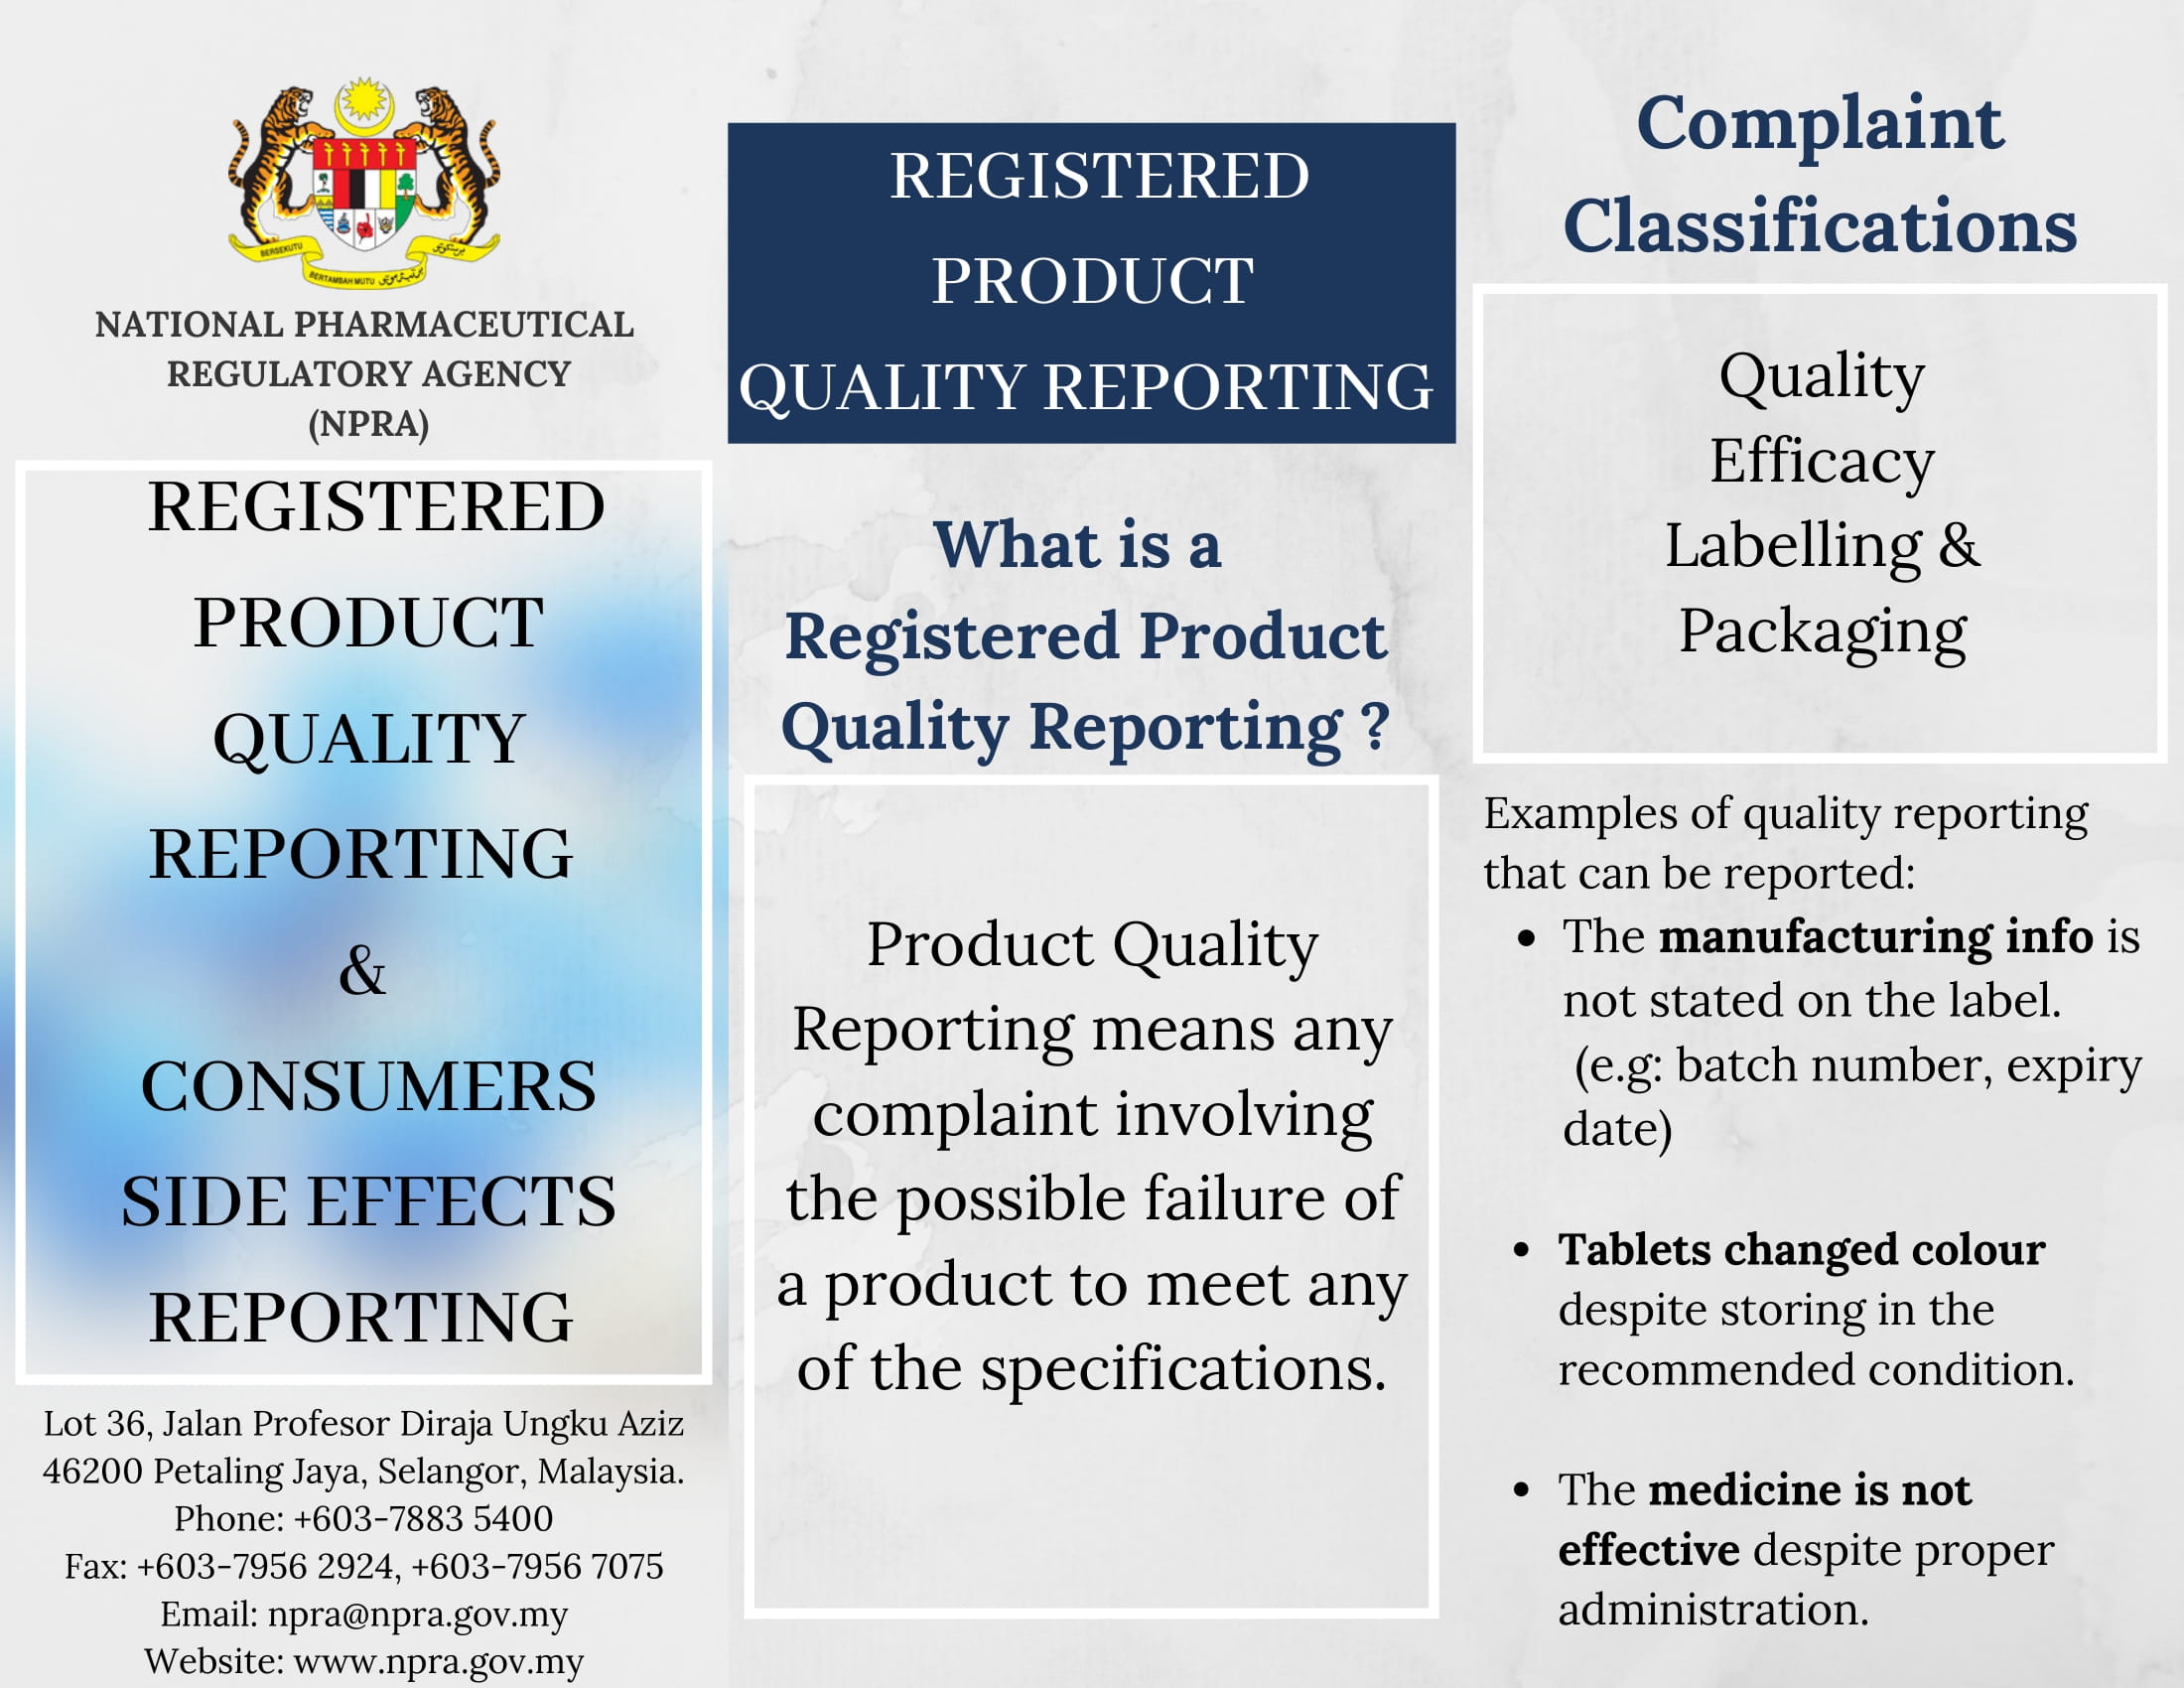 Registered Product Quality Reporting & Consumers Side Effects Reporting